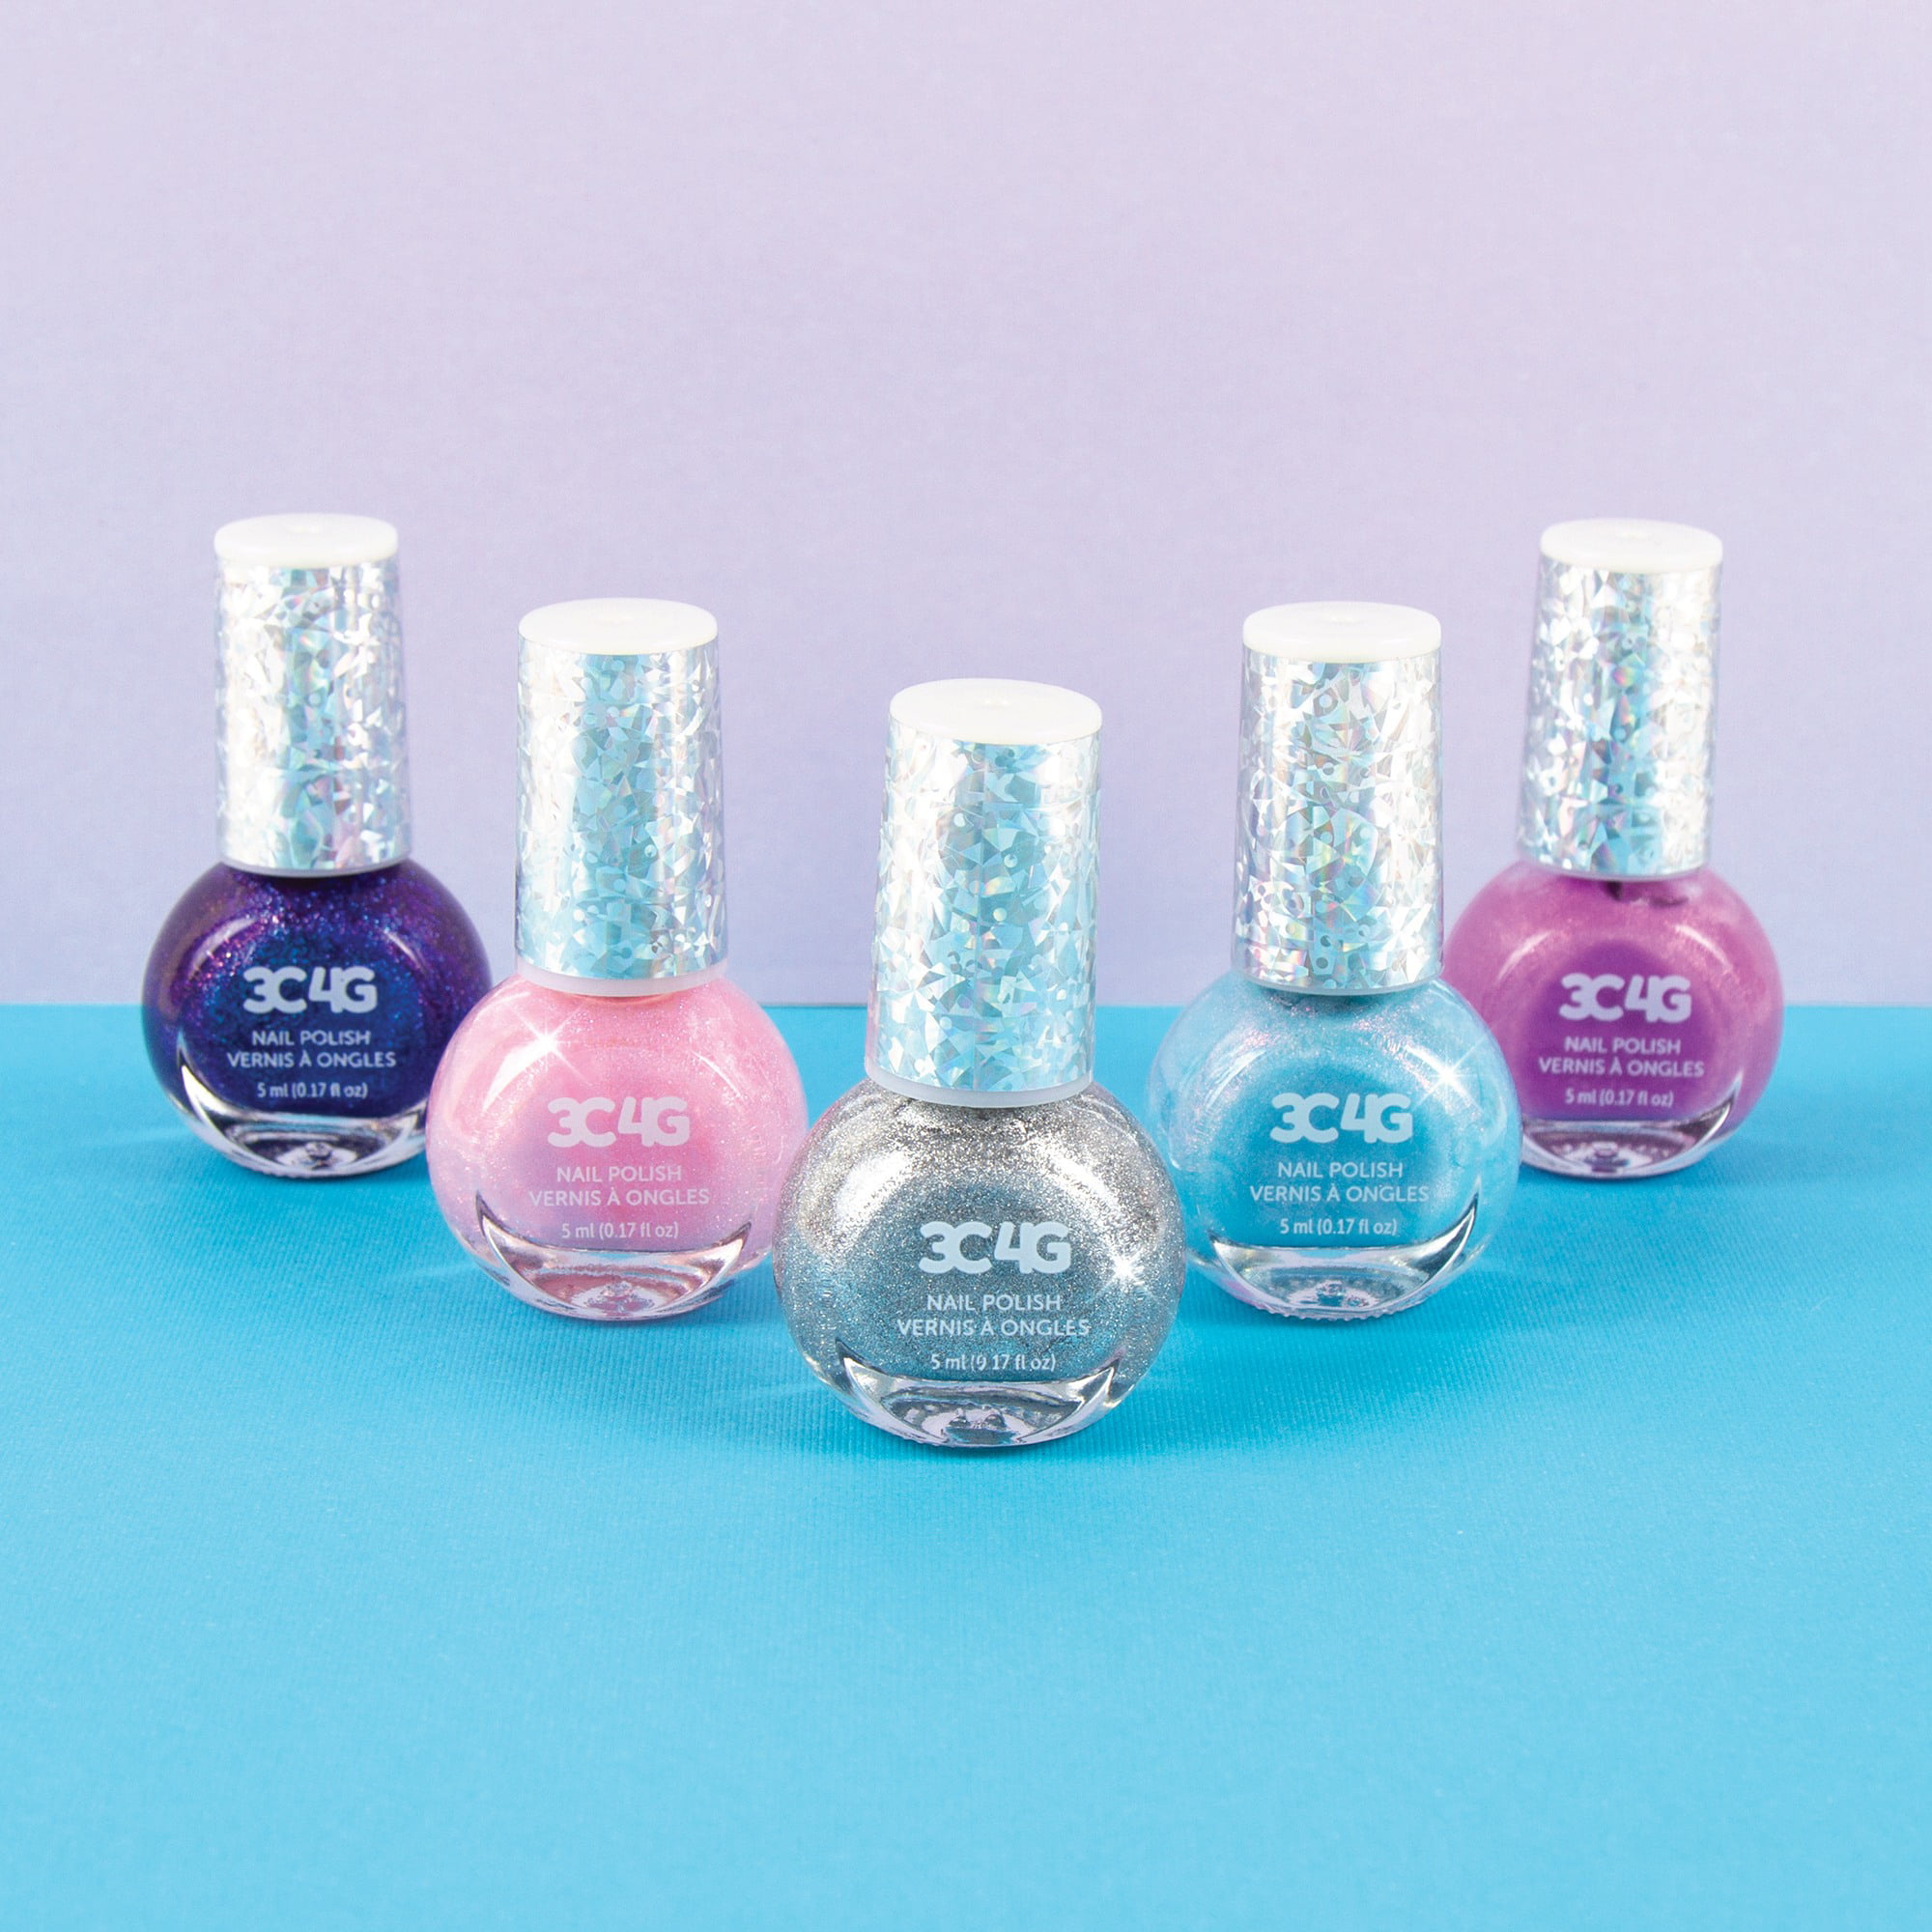 3C4G: Glow In The Dark Nail Polish Set - 5 Bottles, Make It Real, Teens  Tweens & Girls, Non-Toxic Long-Lasting Polish, Vibrant Neon Colors, Glow  Wherever You Go, Three Cheers For Girls